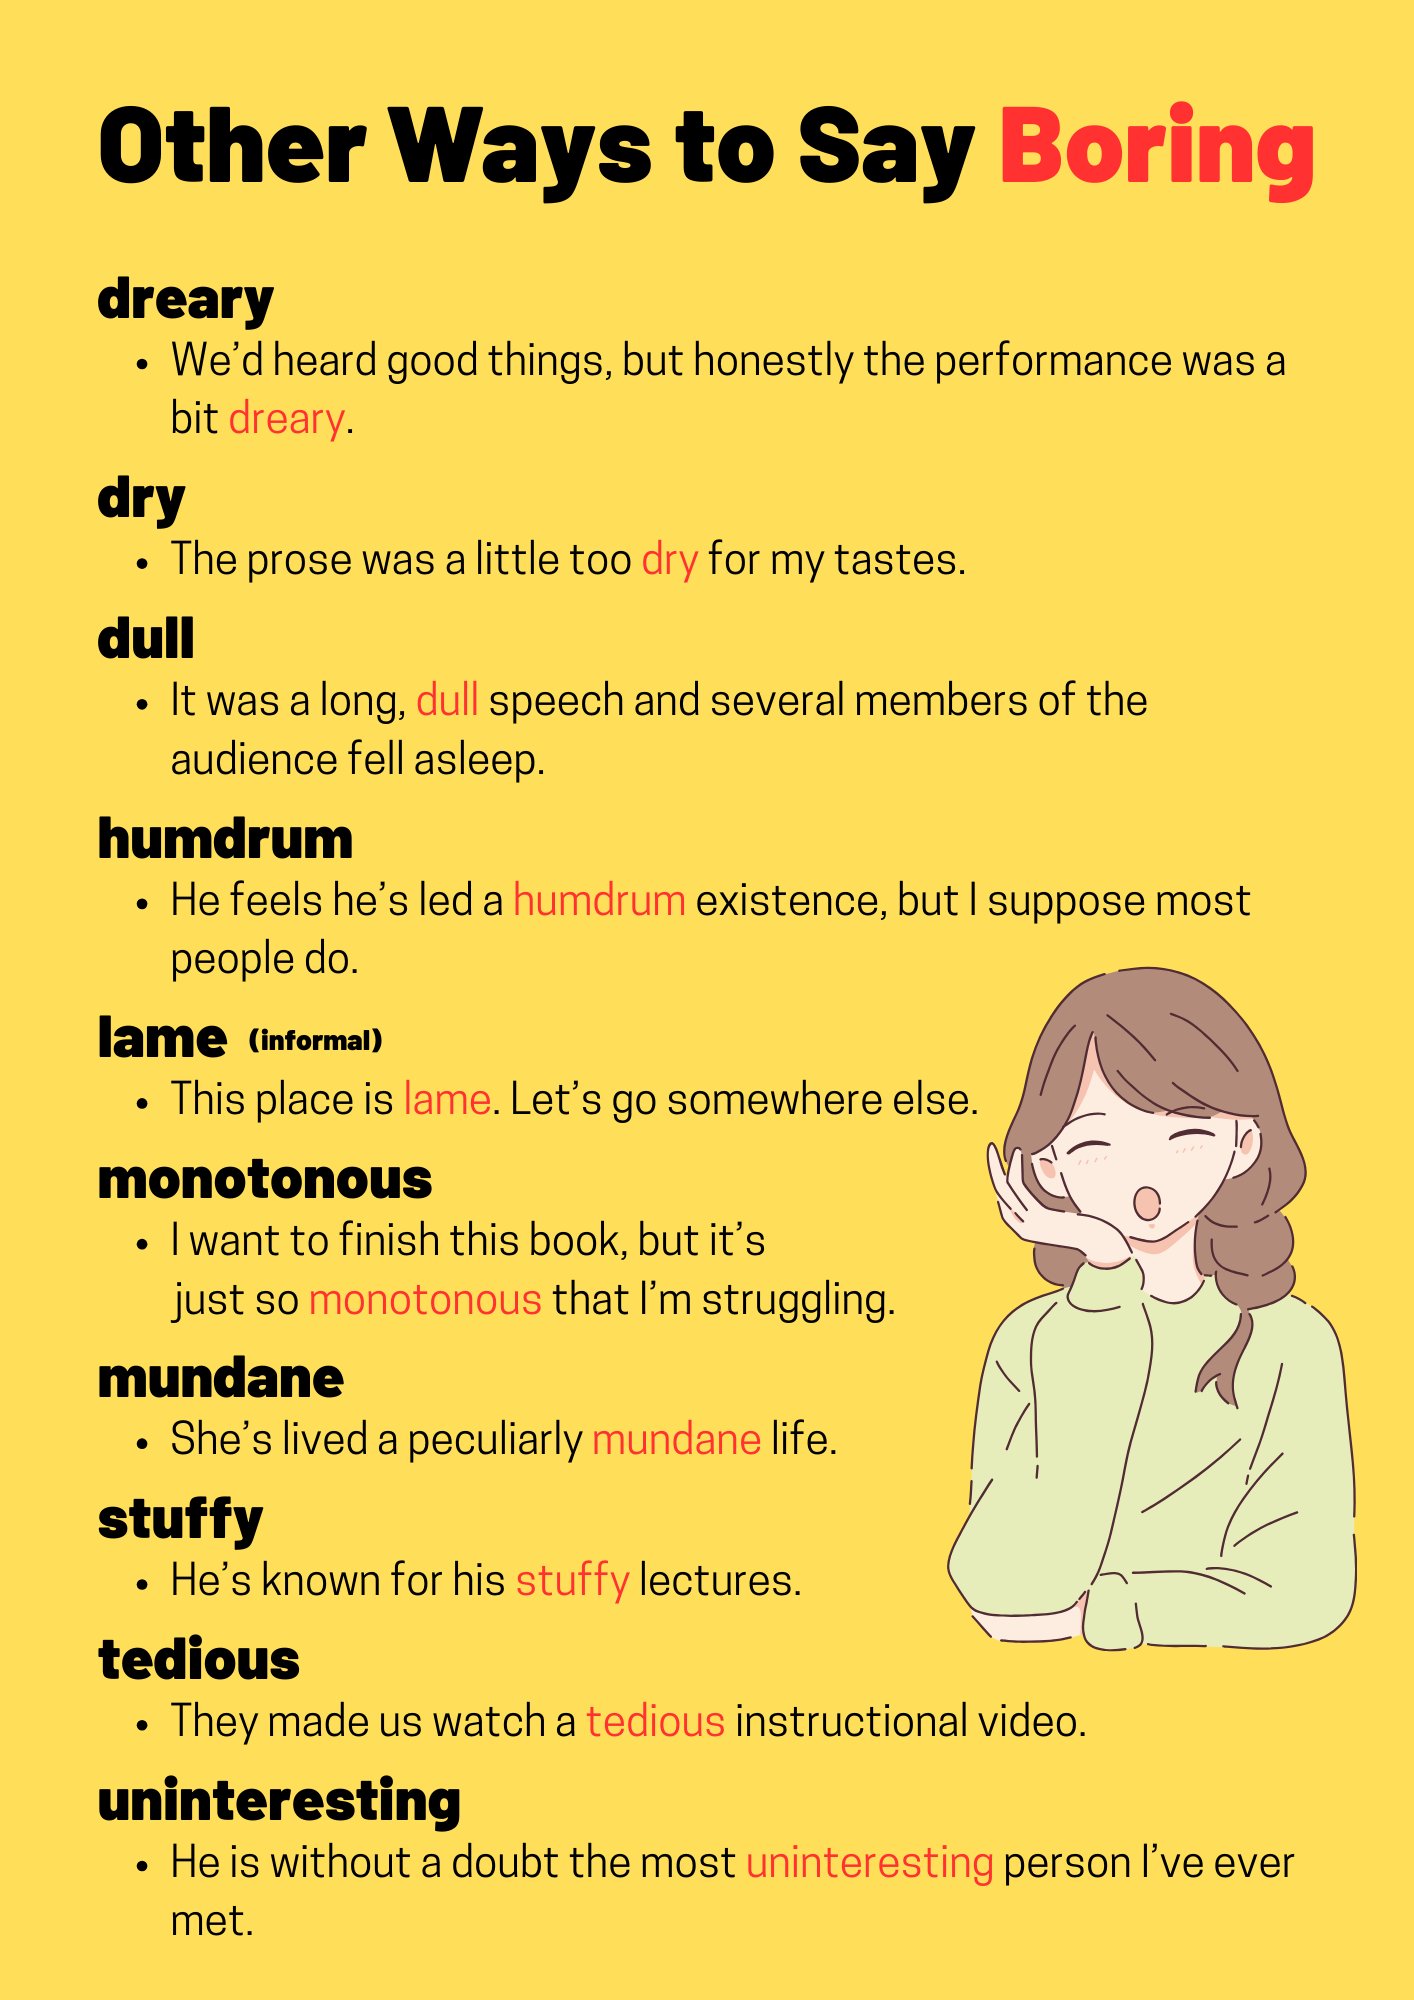 Synonyms for People - TED IELTS